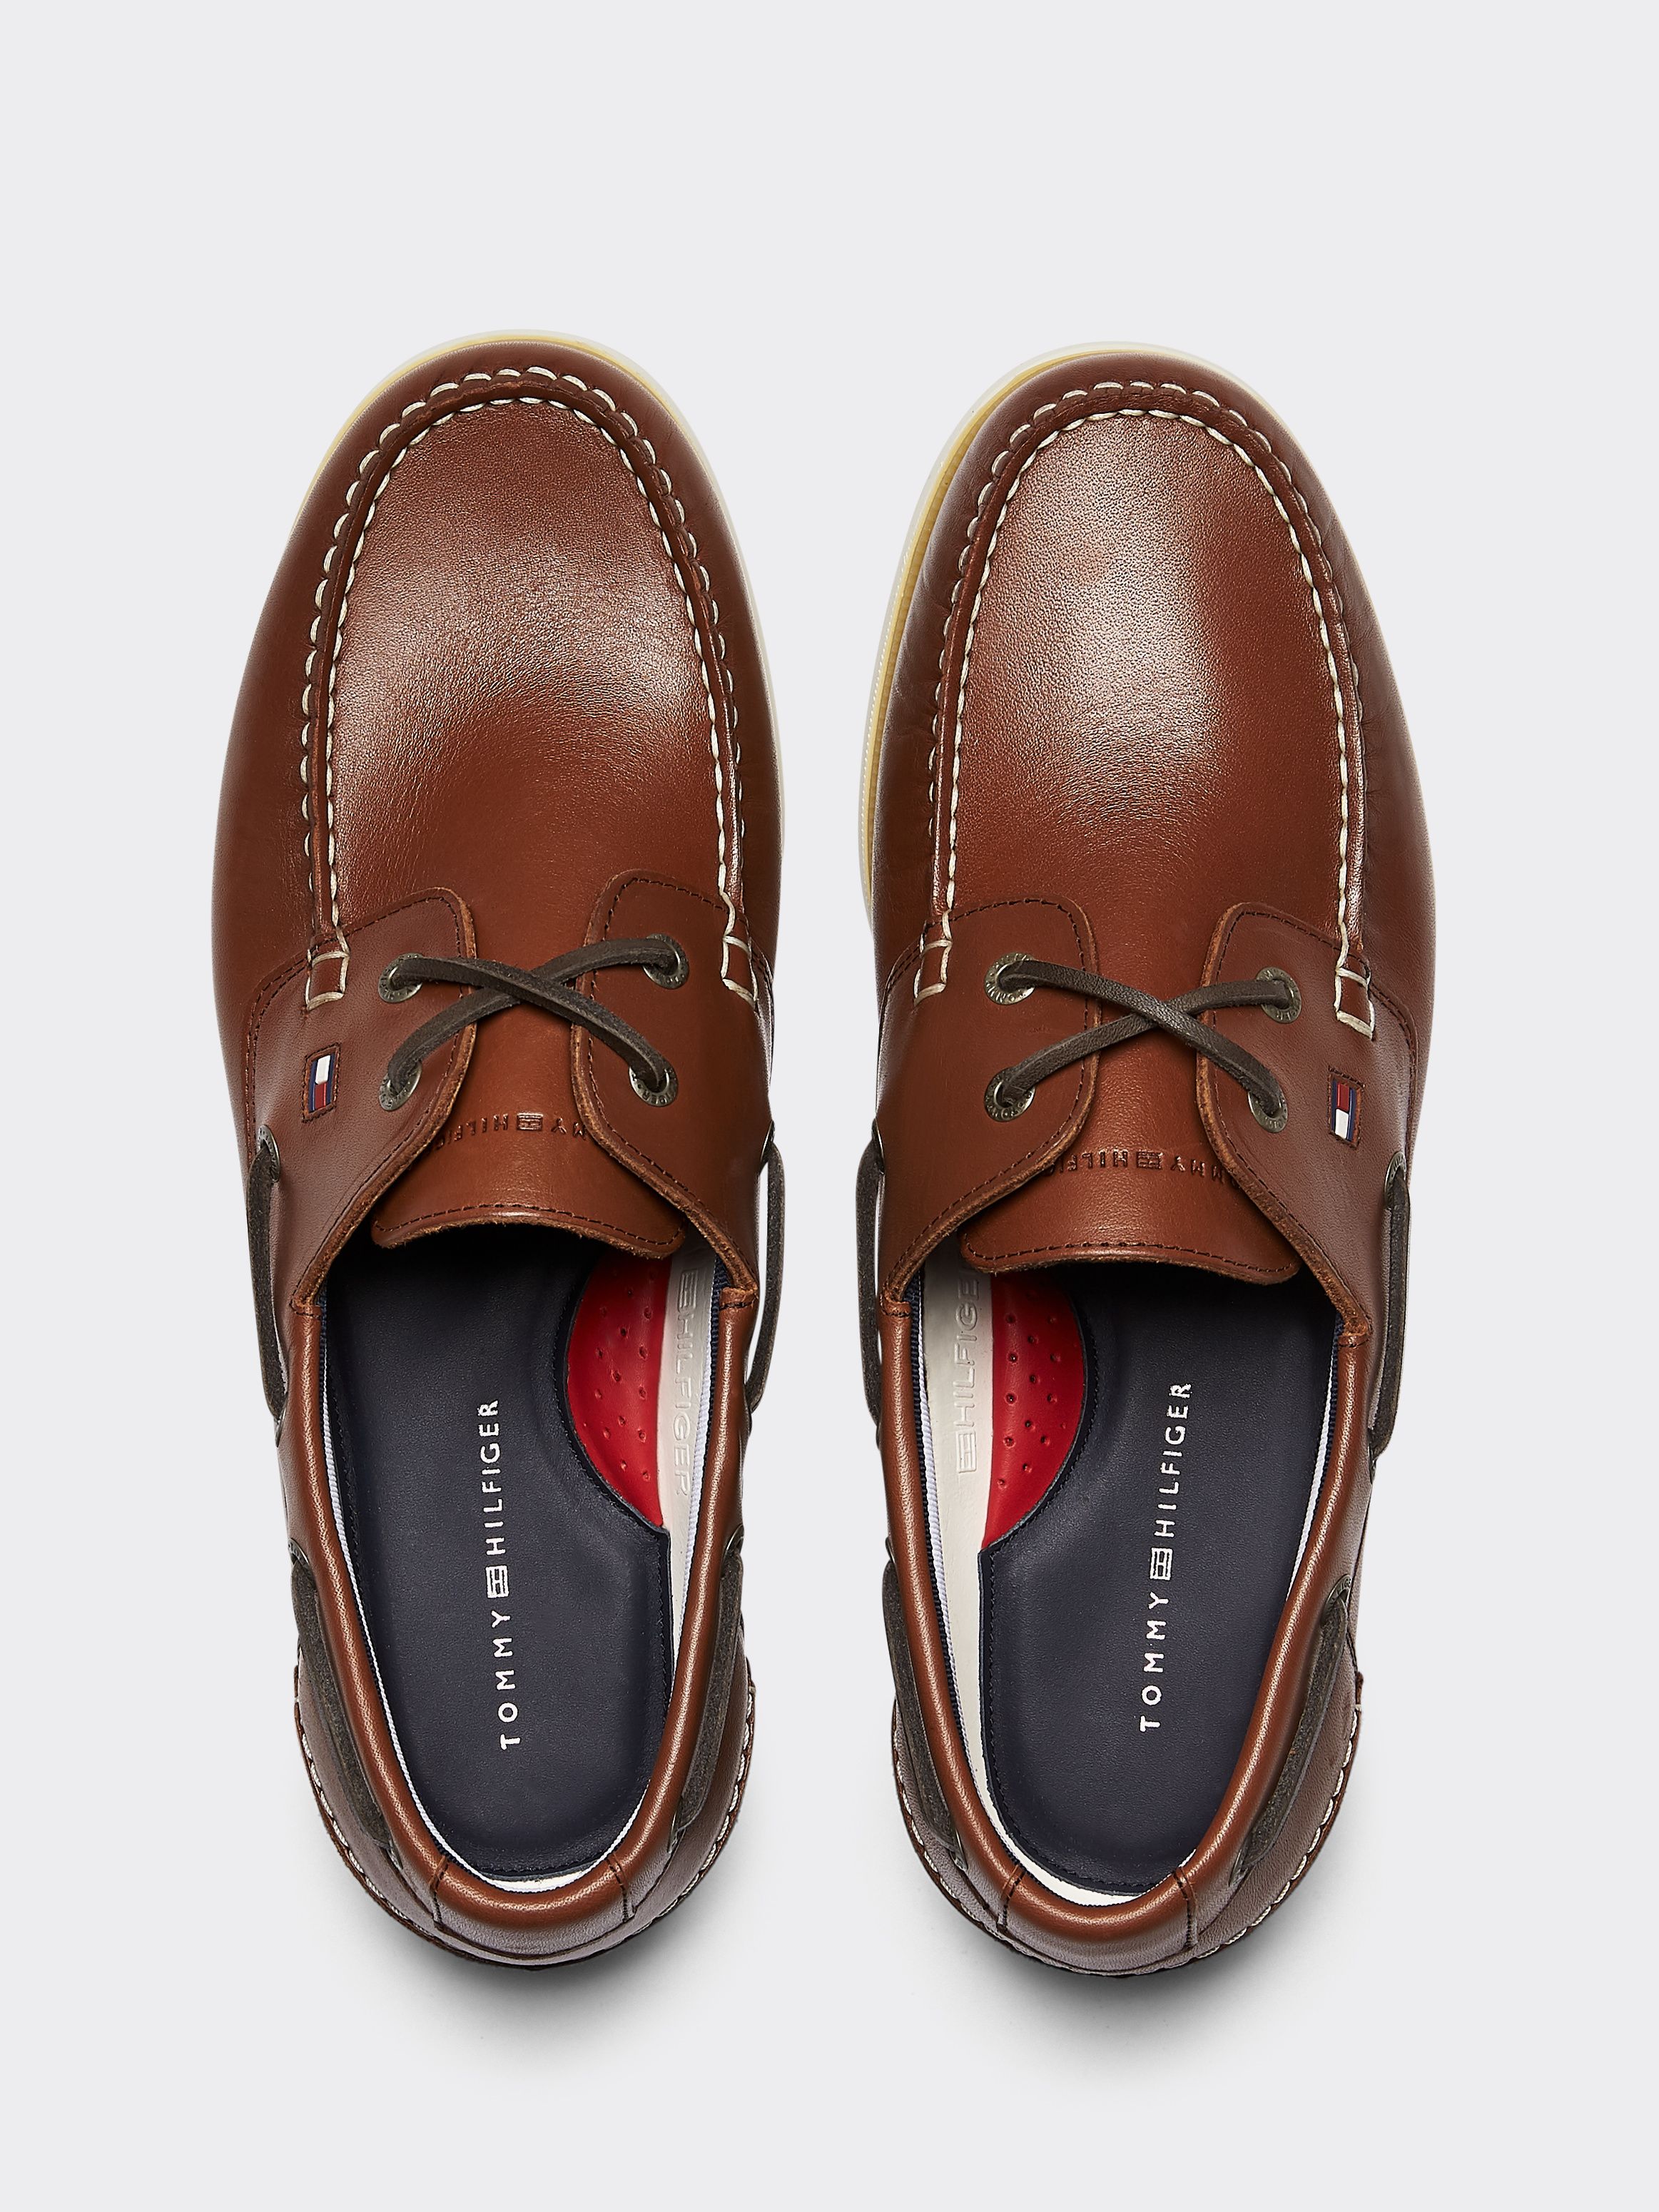 Tommy Hilfiger|Leather Boat Shoes|Tommy 